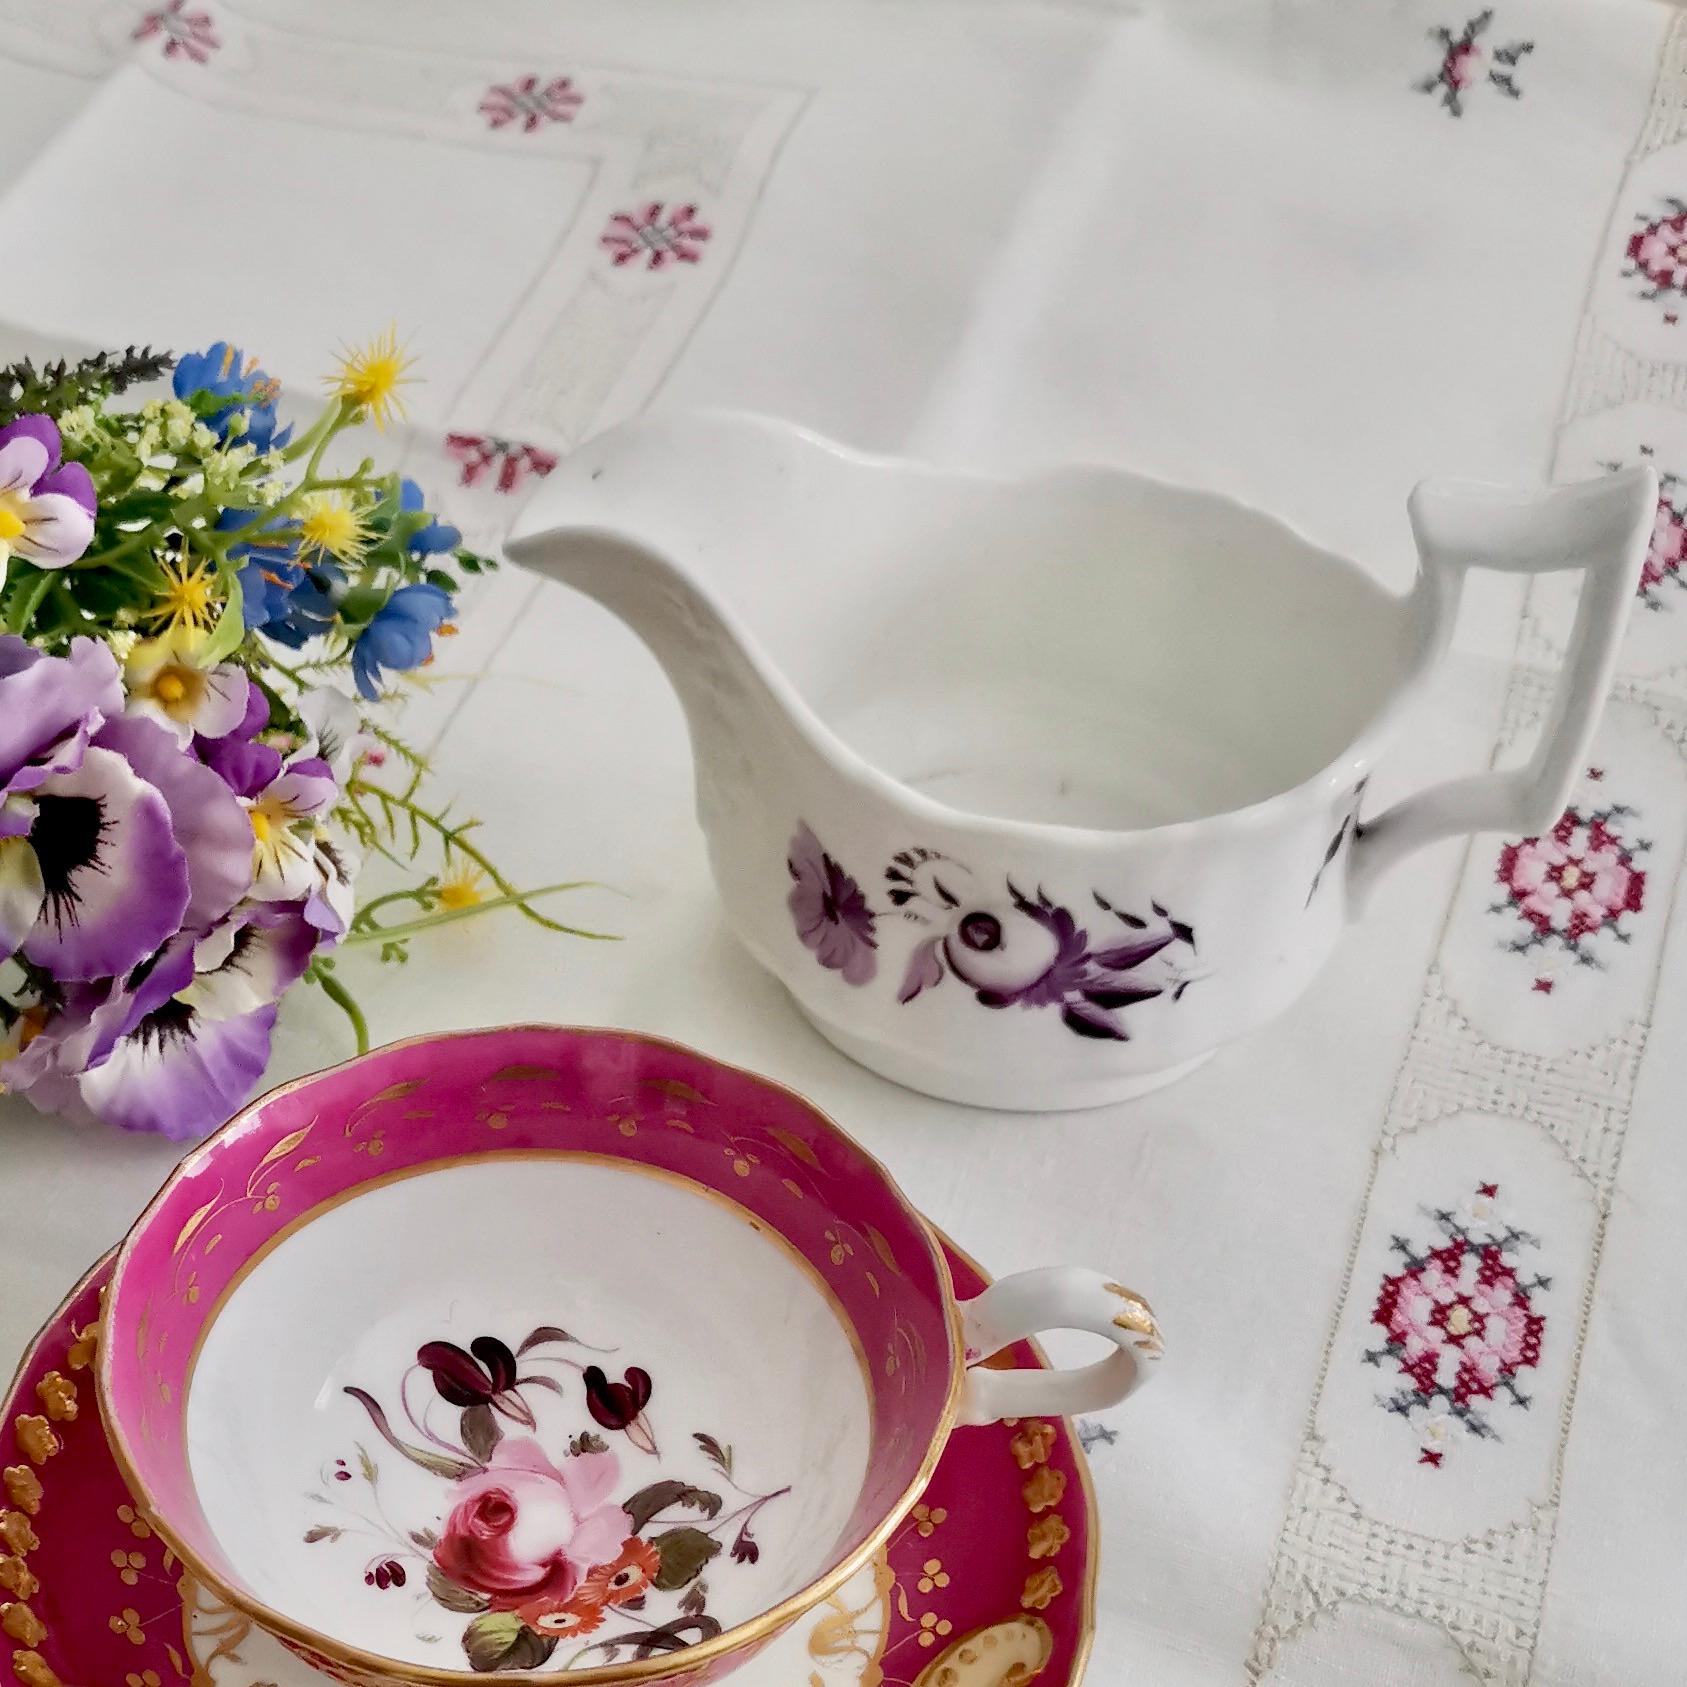 This is a charming milk jug or creamer made circa 1825 by Ridgway. The jug is decorated with simple monochrome puce / purple flowers on a white ground. The shape is typical for its time and Ridgway called it the 